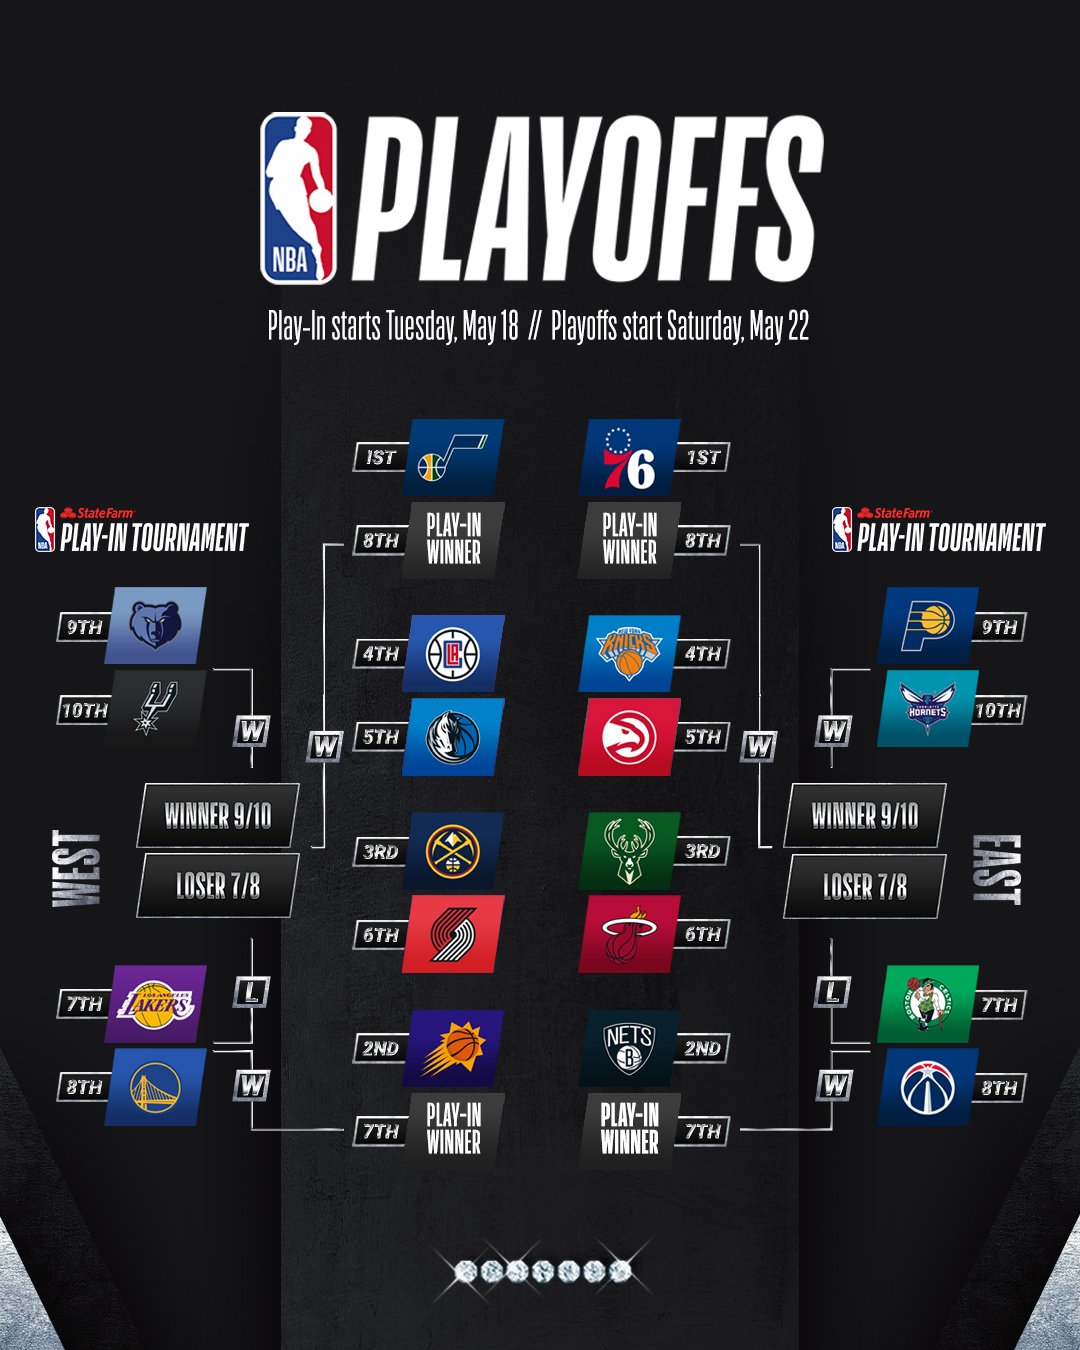 NBA - The Playoff Bracket after Tuesday's action 🏆 #NBAPlayoffs